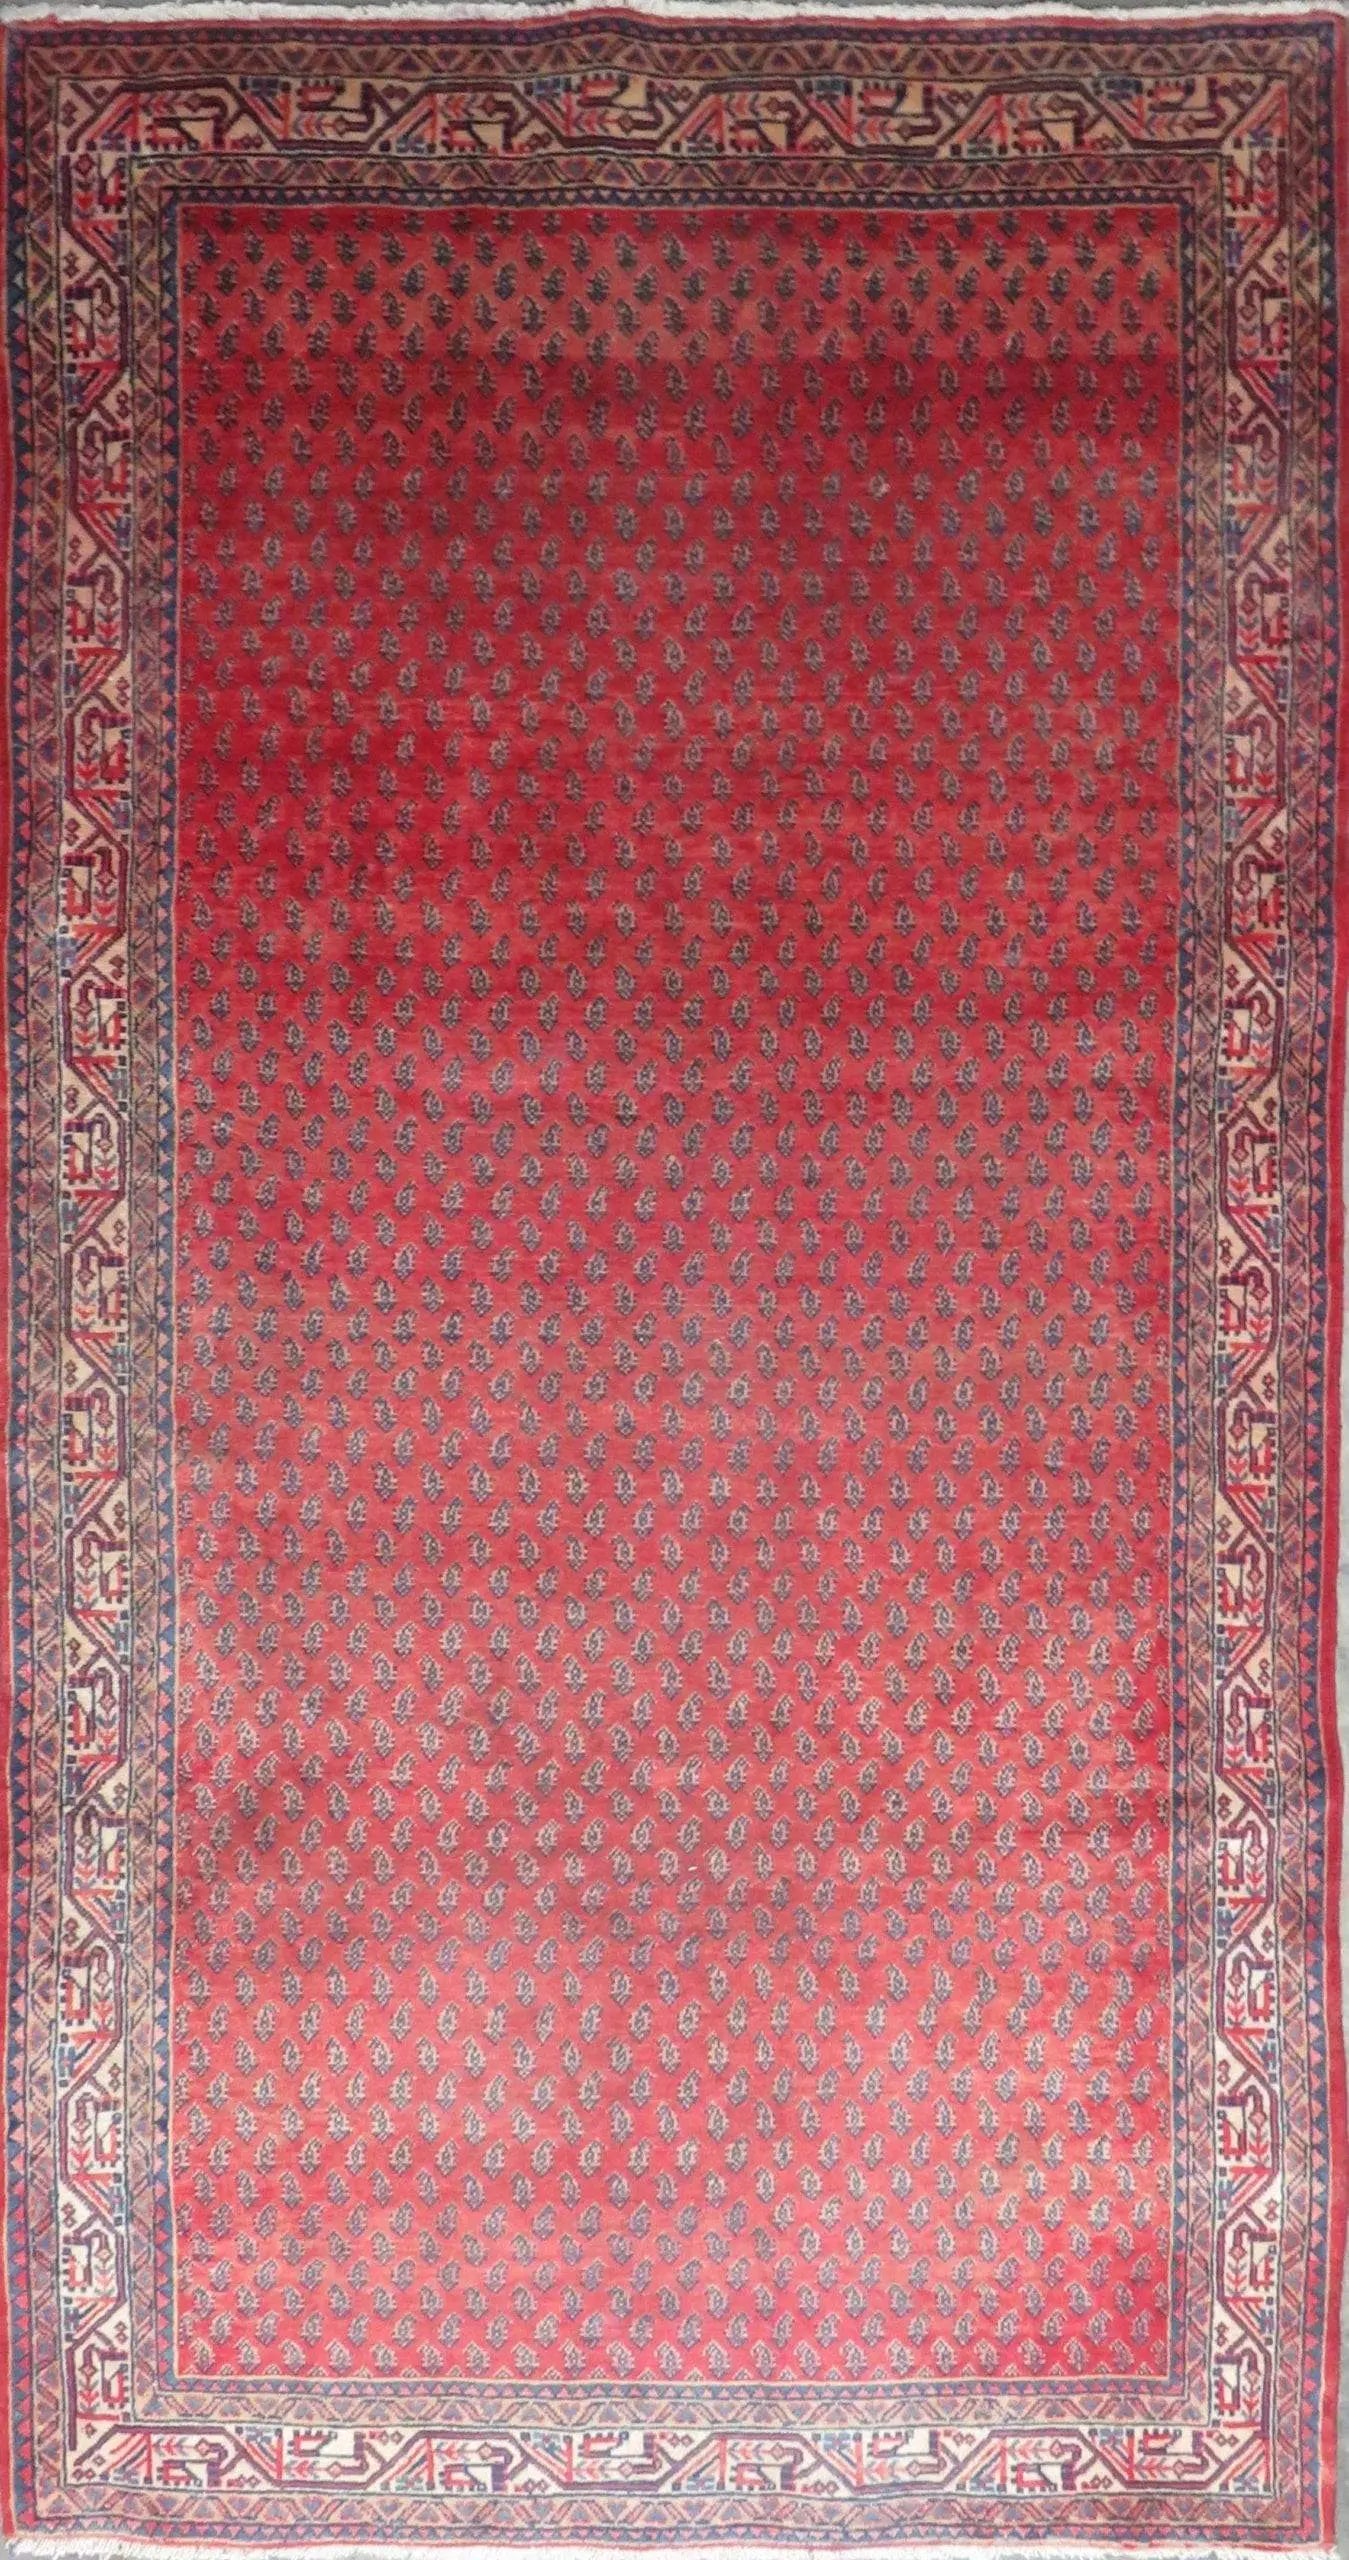 Hand-Knotted Persian Wool Rug _ Luxurious Vintage Design, 10'0" x 5'2", Artisan Crafted